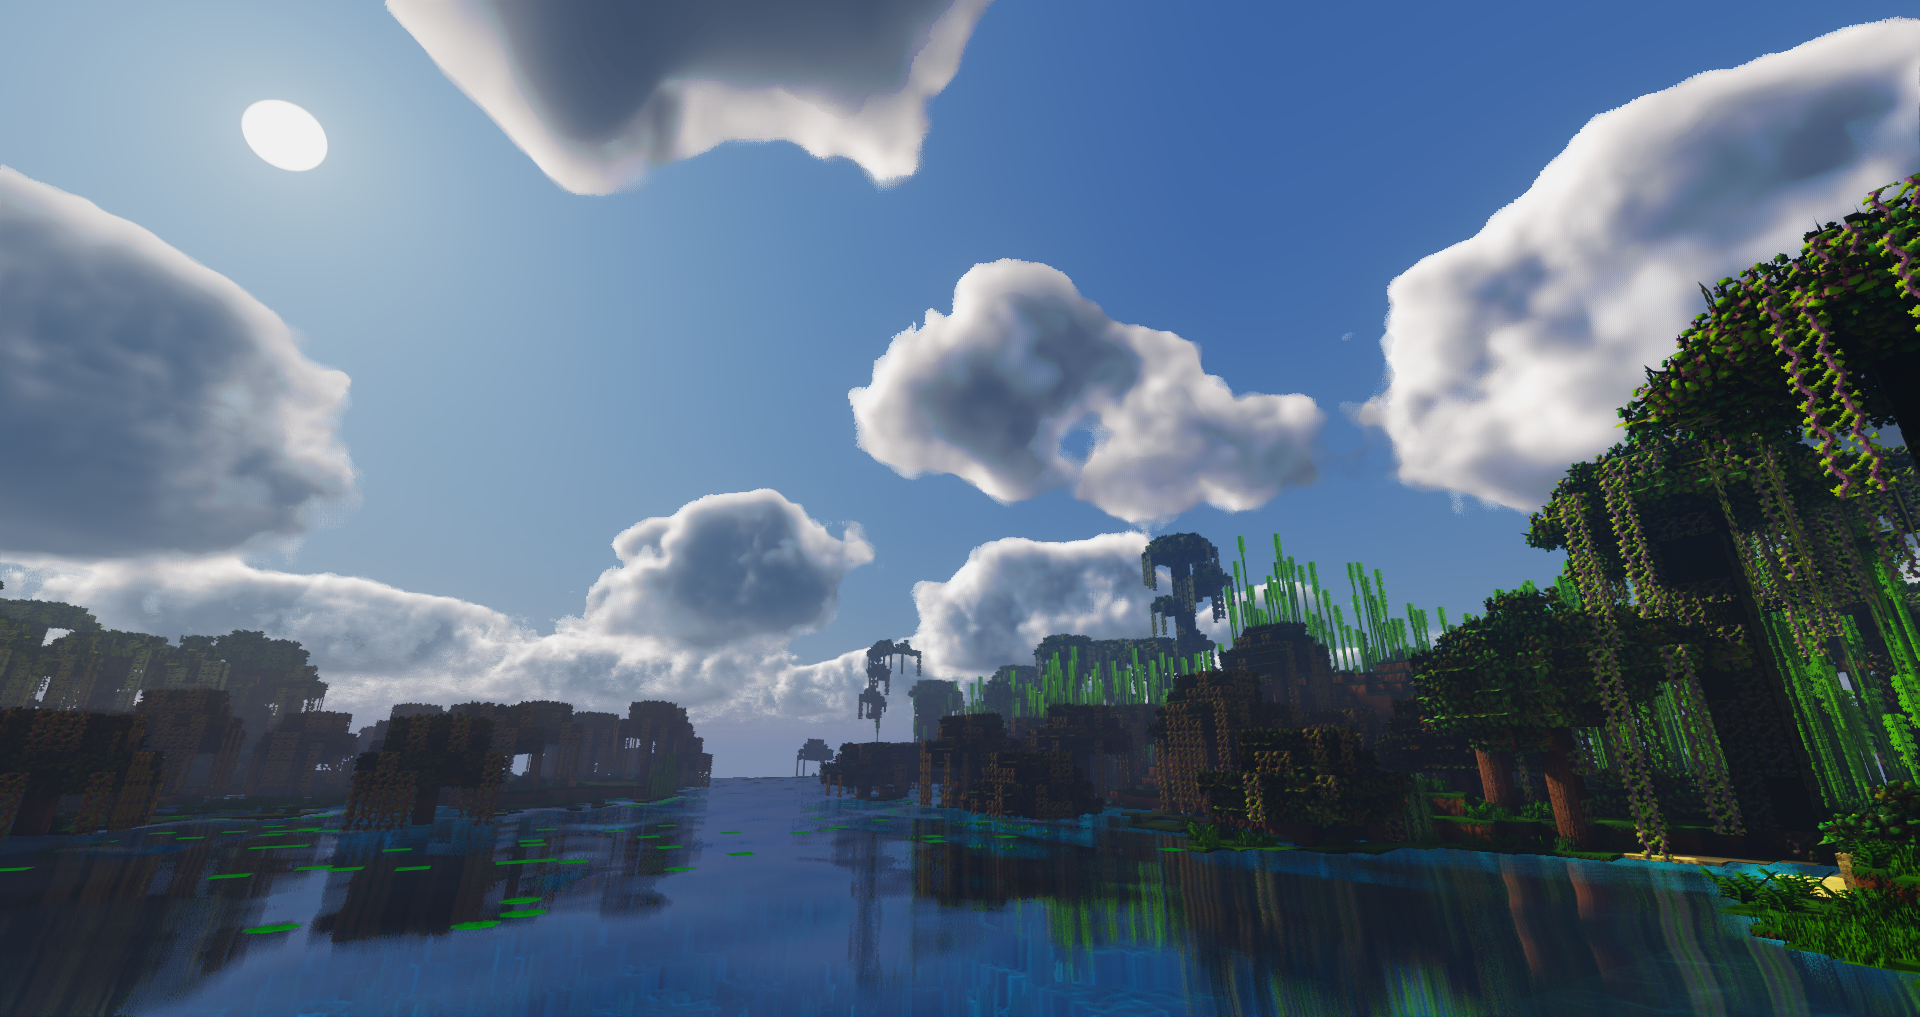 images/2406/14/Exposa_Shaders_1.png